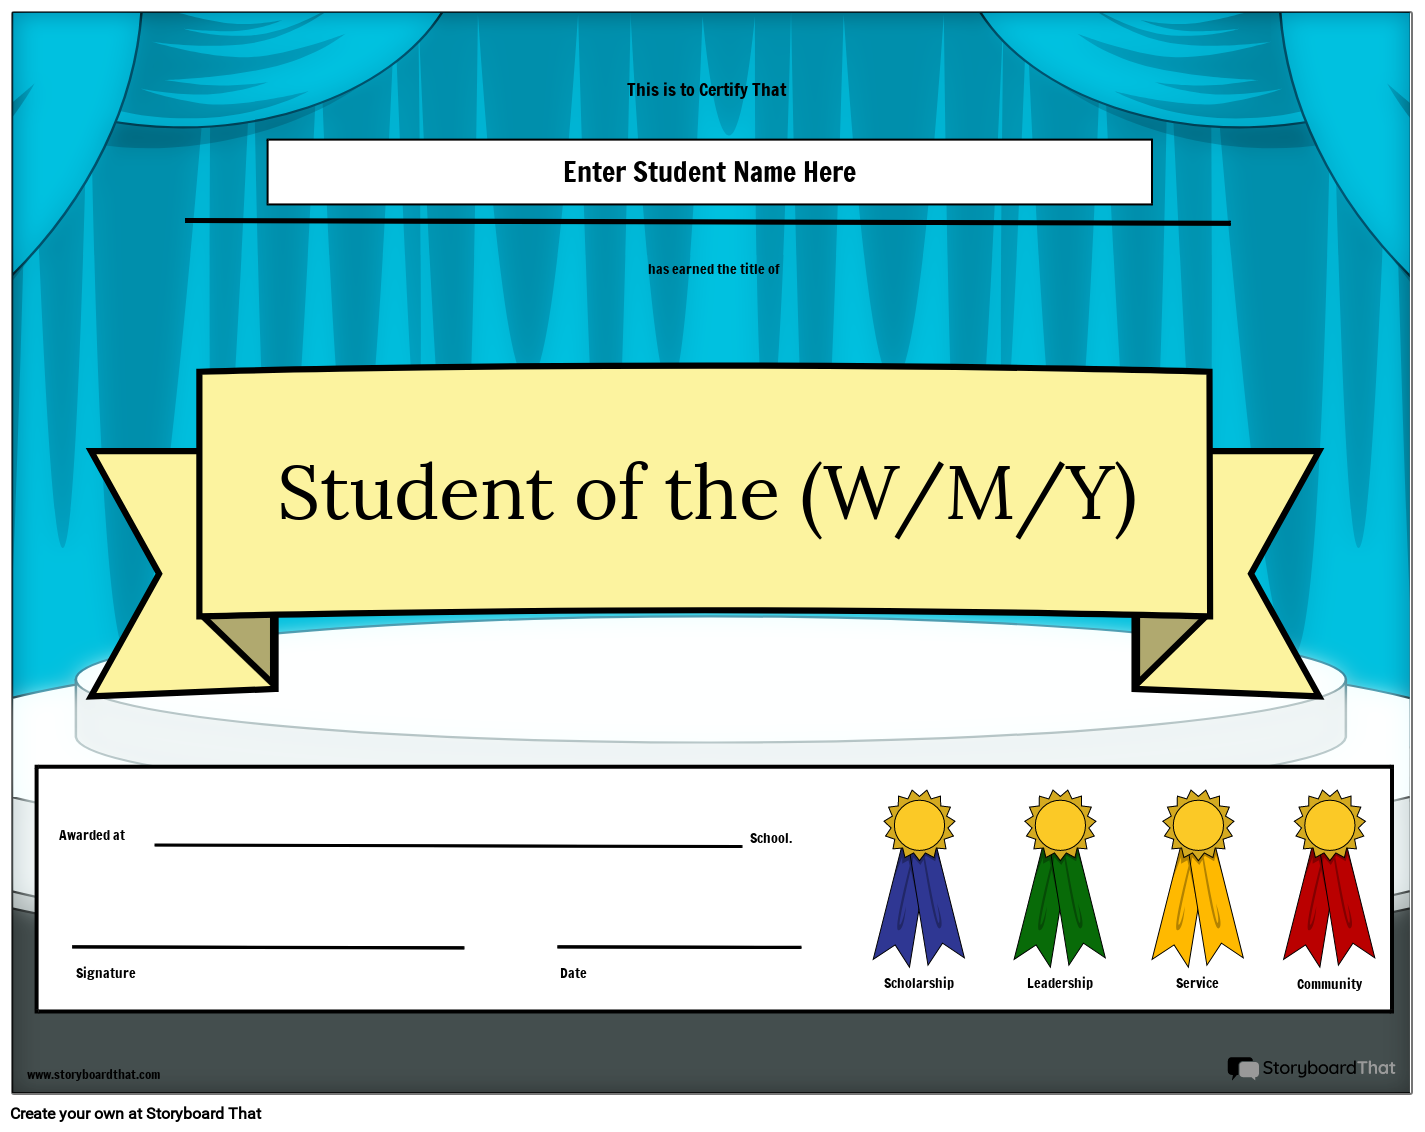 Student of the (w/m/y) Award